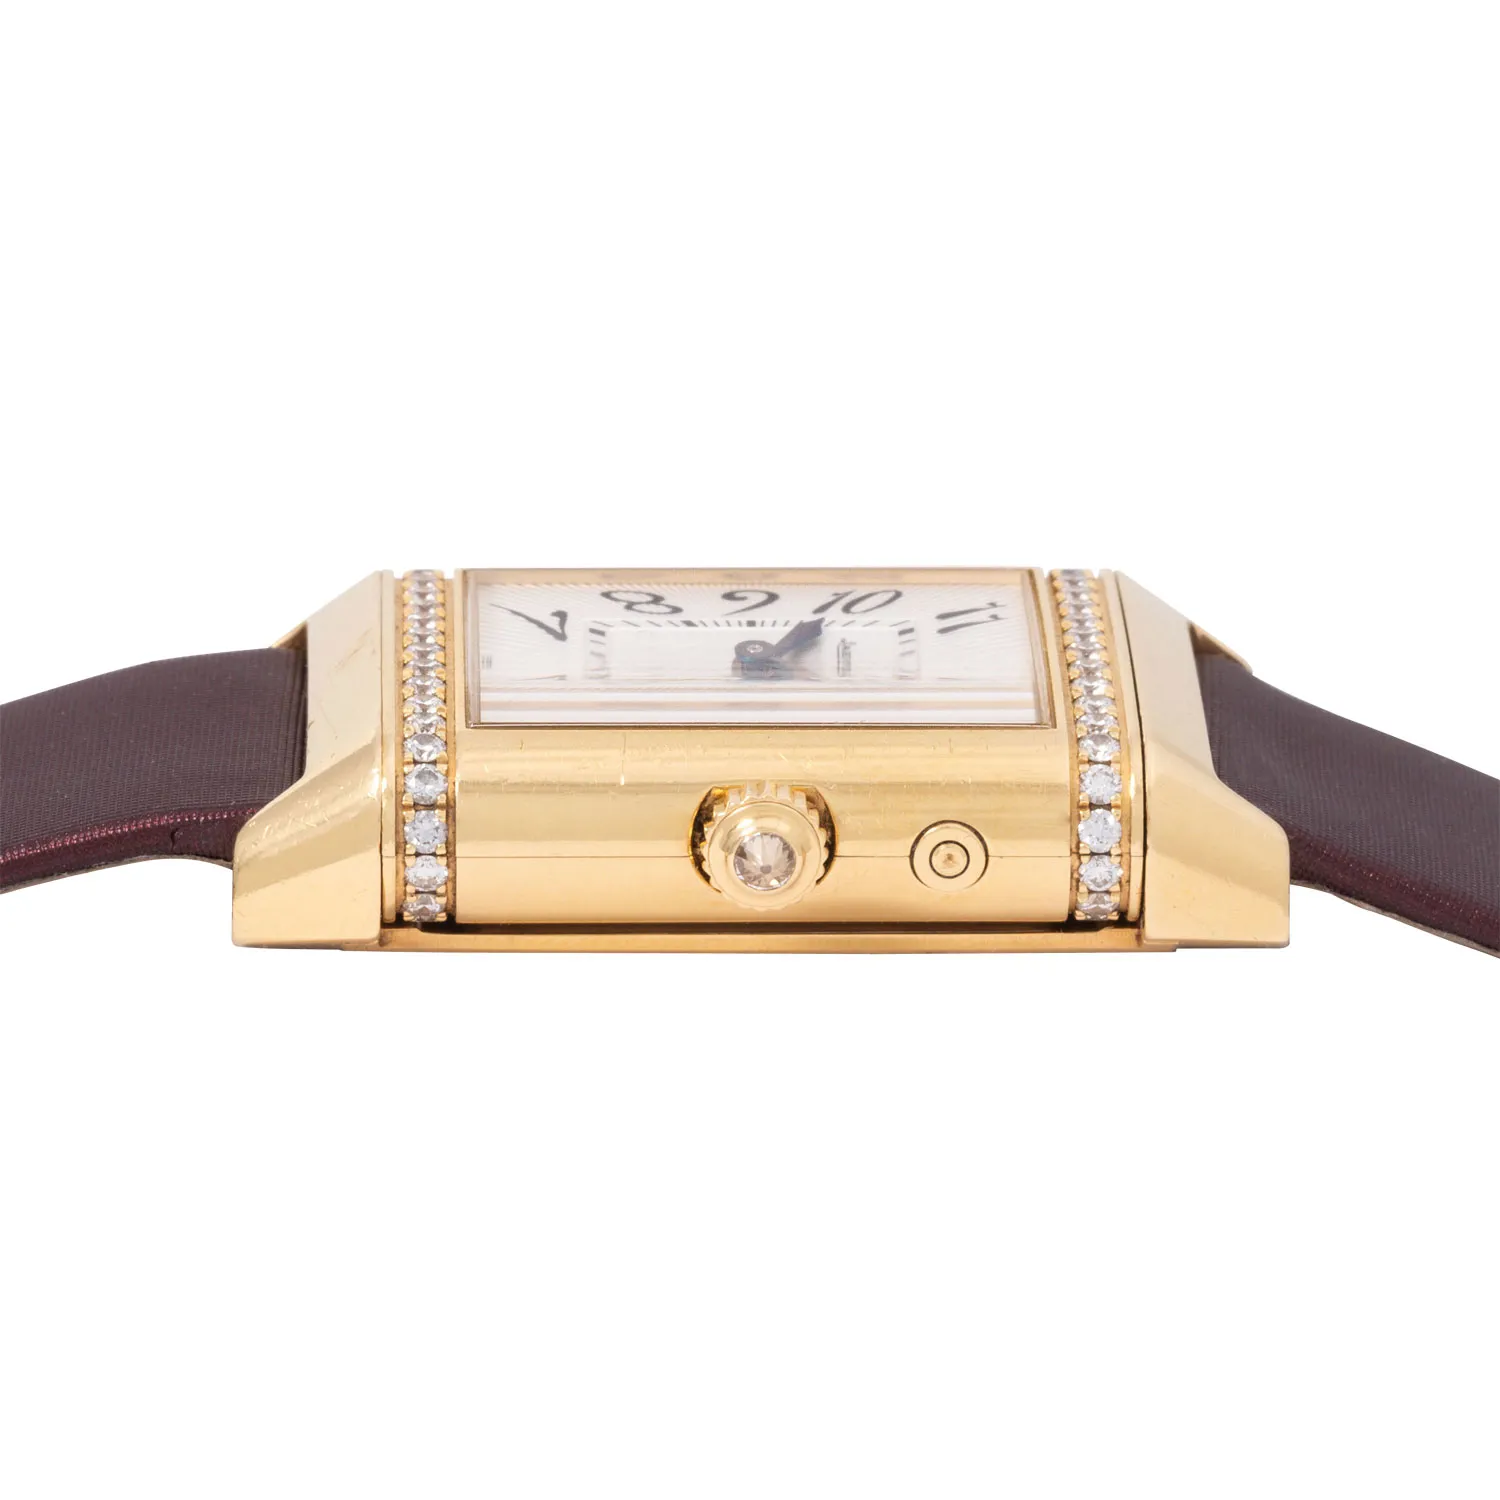 Jaeger-LeCoultre Reverso Duetto Duo 26.1.54 25mm Yellow gold and diamond-set 2